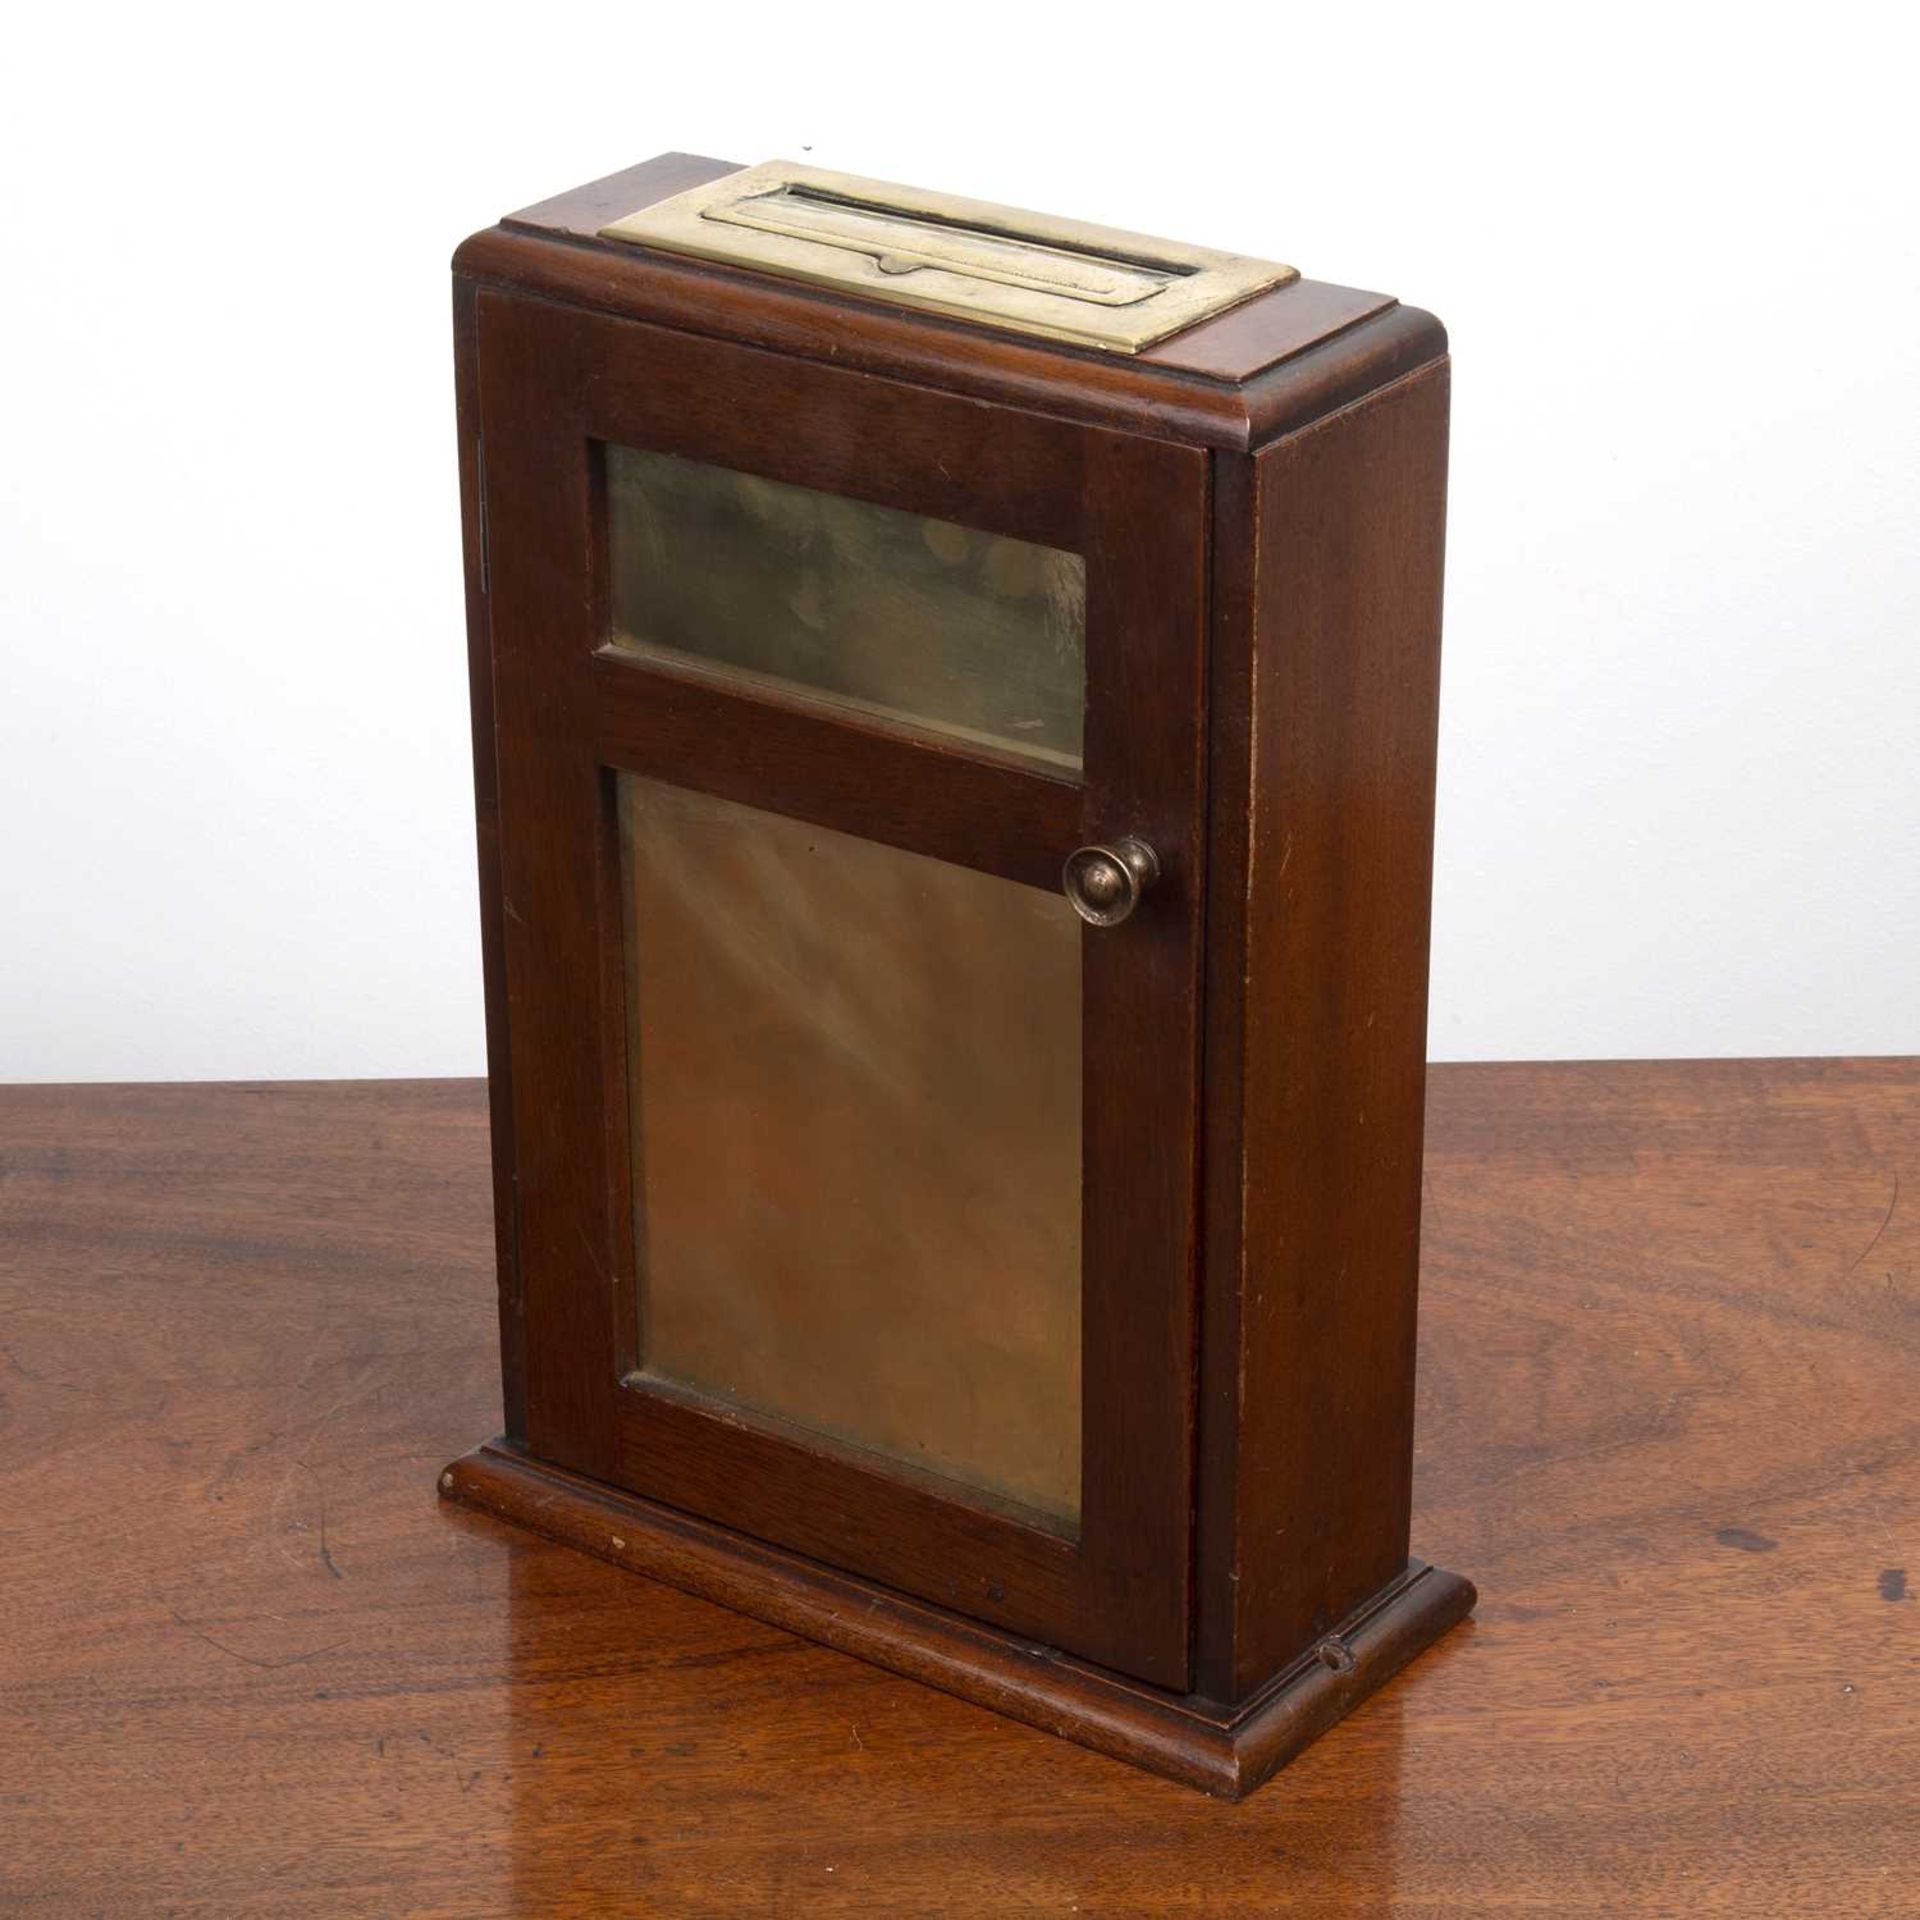 Mahogany and brass fronted ballot/vote box late 19th/early 20th Century, 25cm wide x 34cm high x - Image 2 of 5